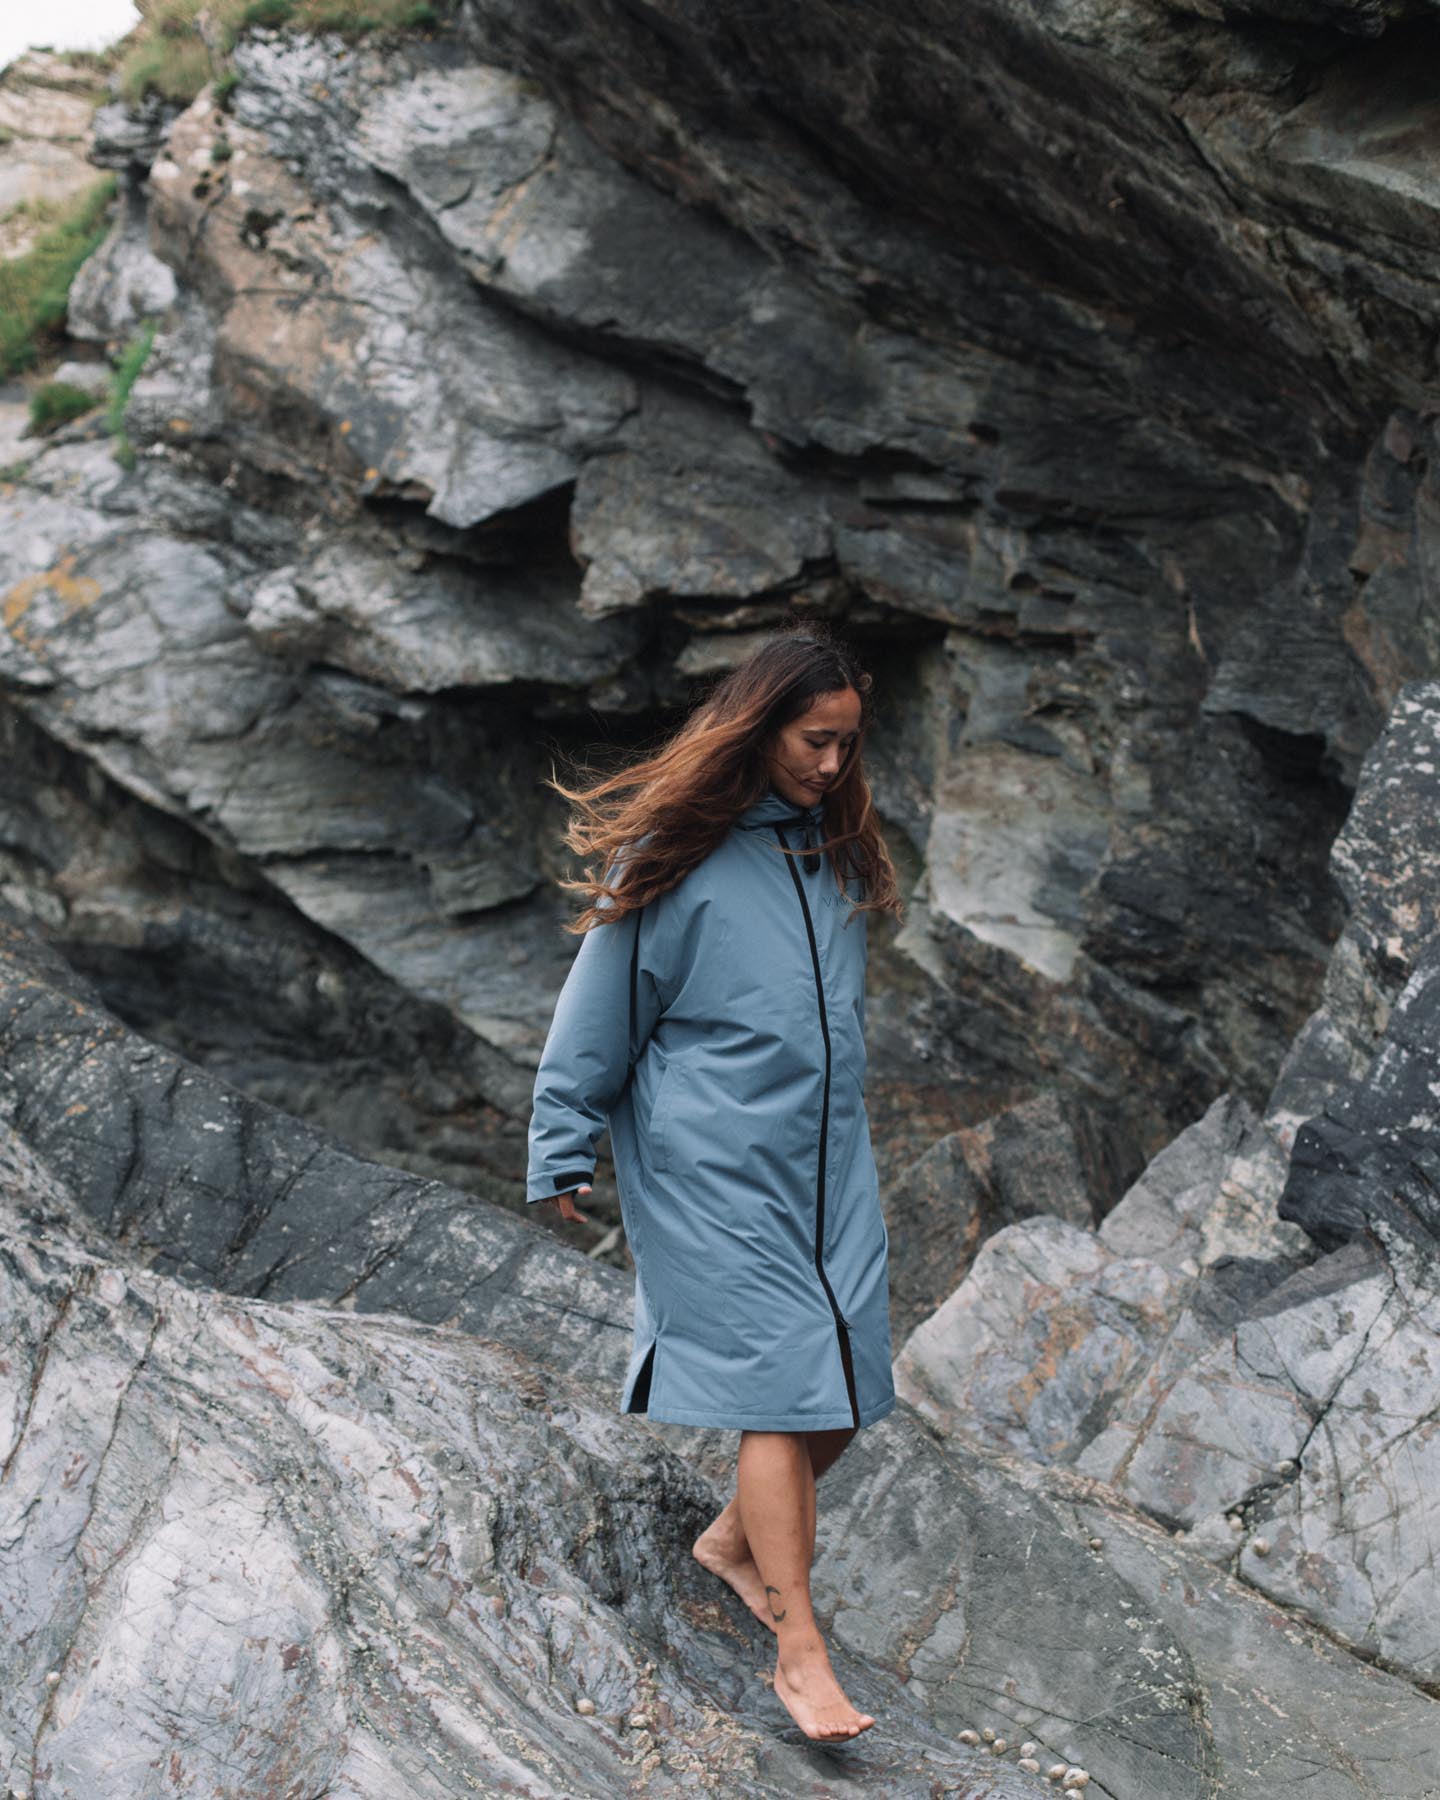 Introducing the Vivida All-Weather Changing Robes - the